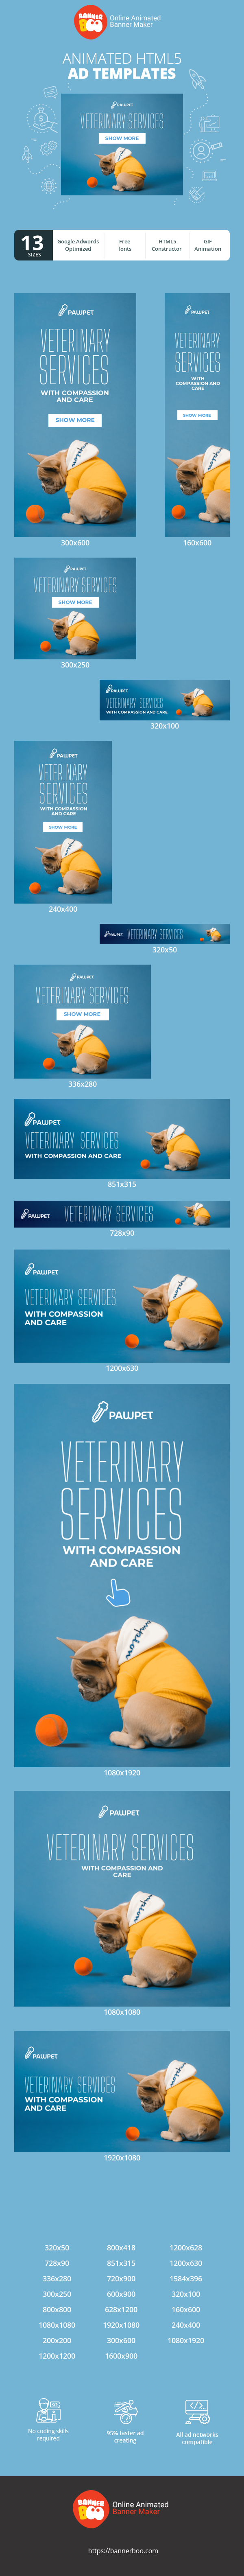 Шаблон рекламного банера — Veterinary Services — With Compassion And Care